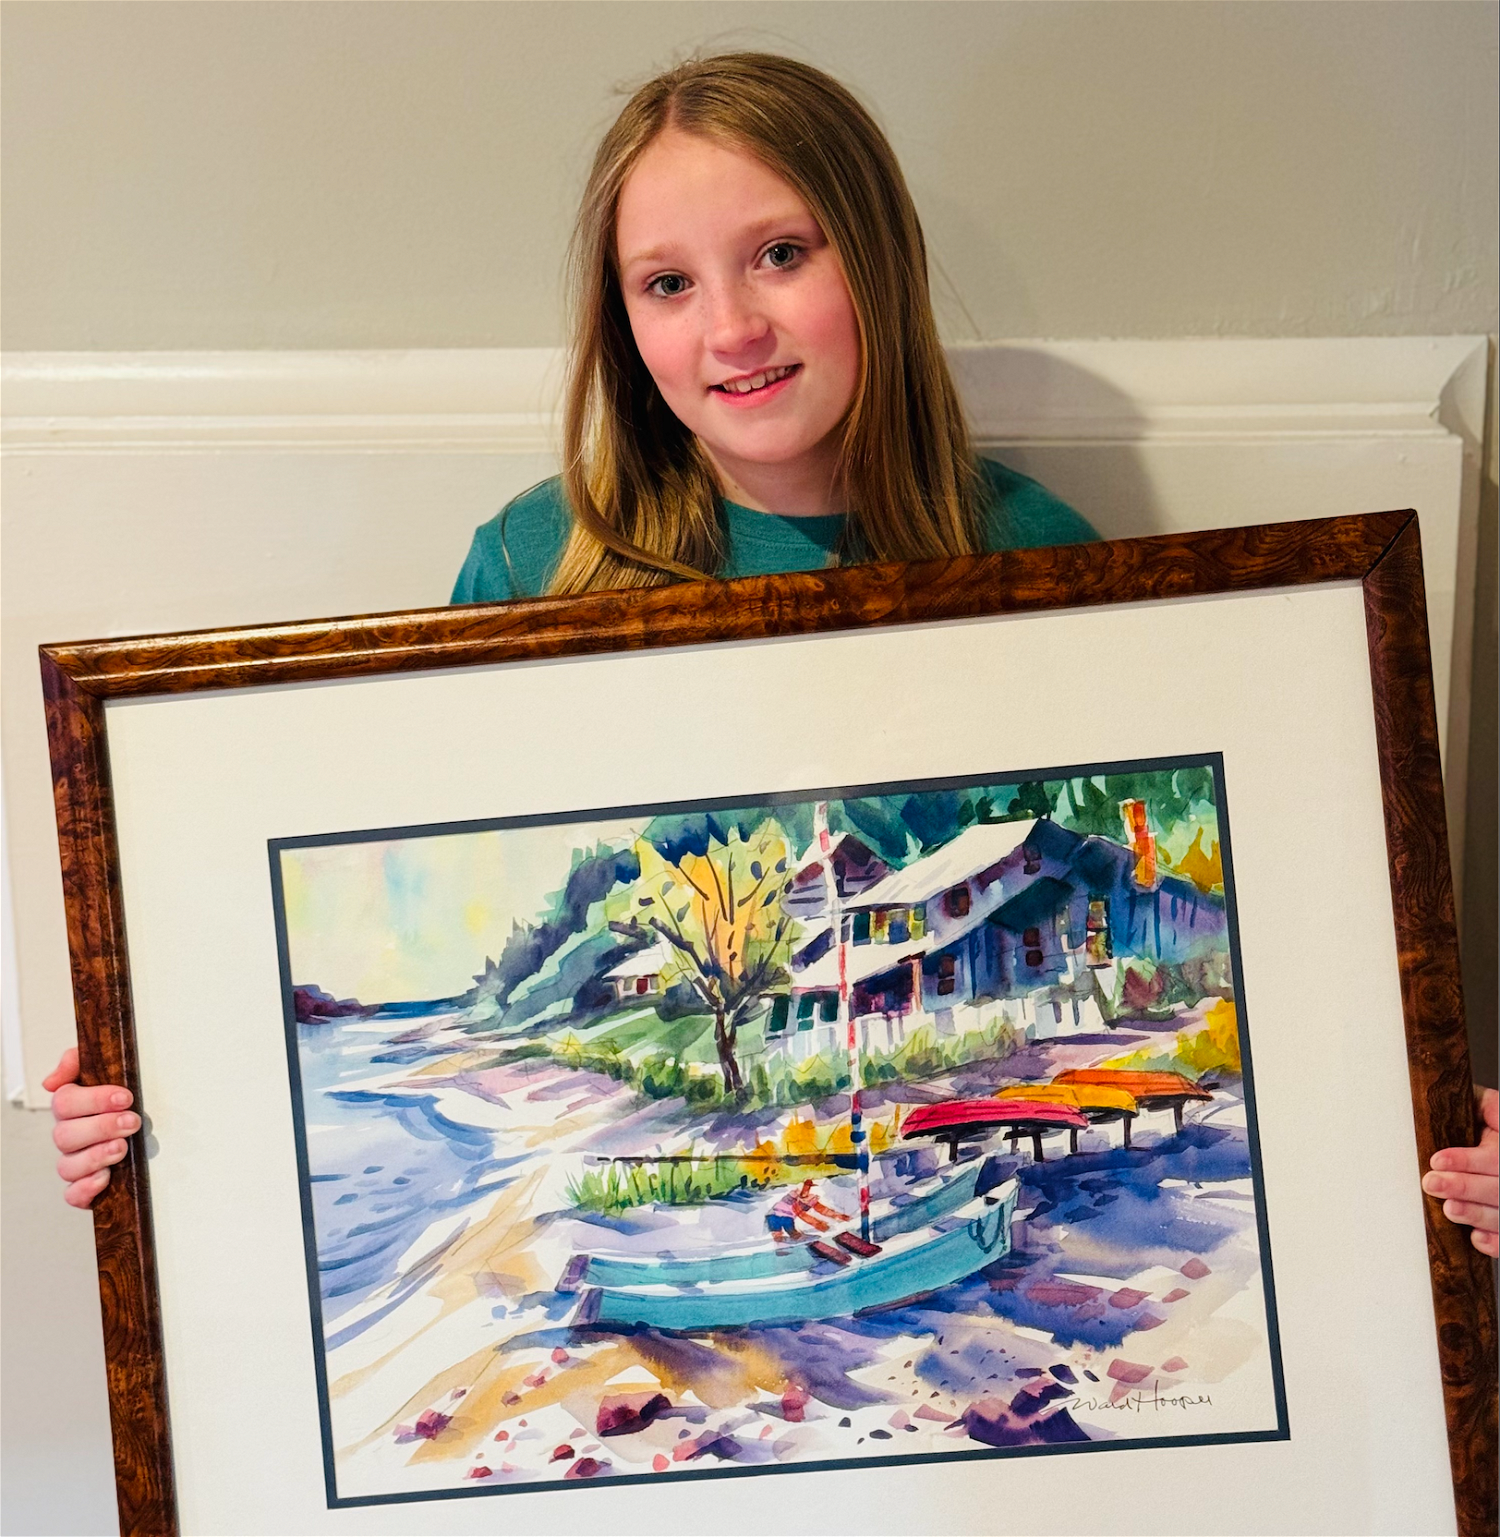 Bridget Gorman with the artwork selected by her family at the Ward Hooper event. Her dad, Matt, connected with the painting because his grandfather used to sail around Asharoken in a catamaran.